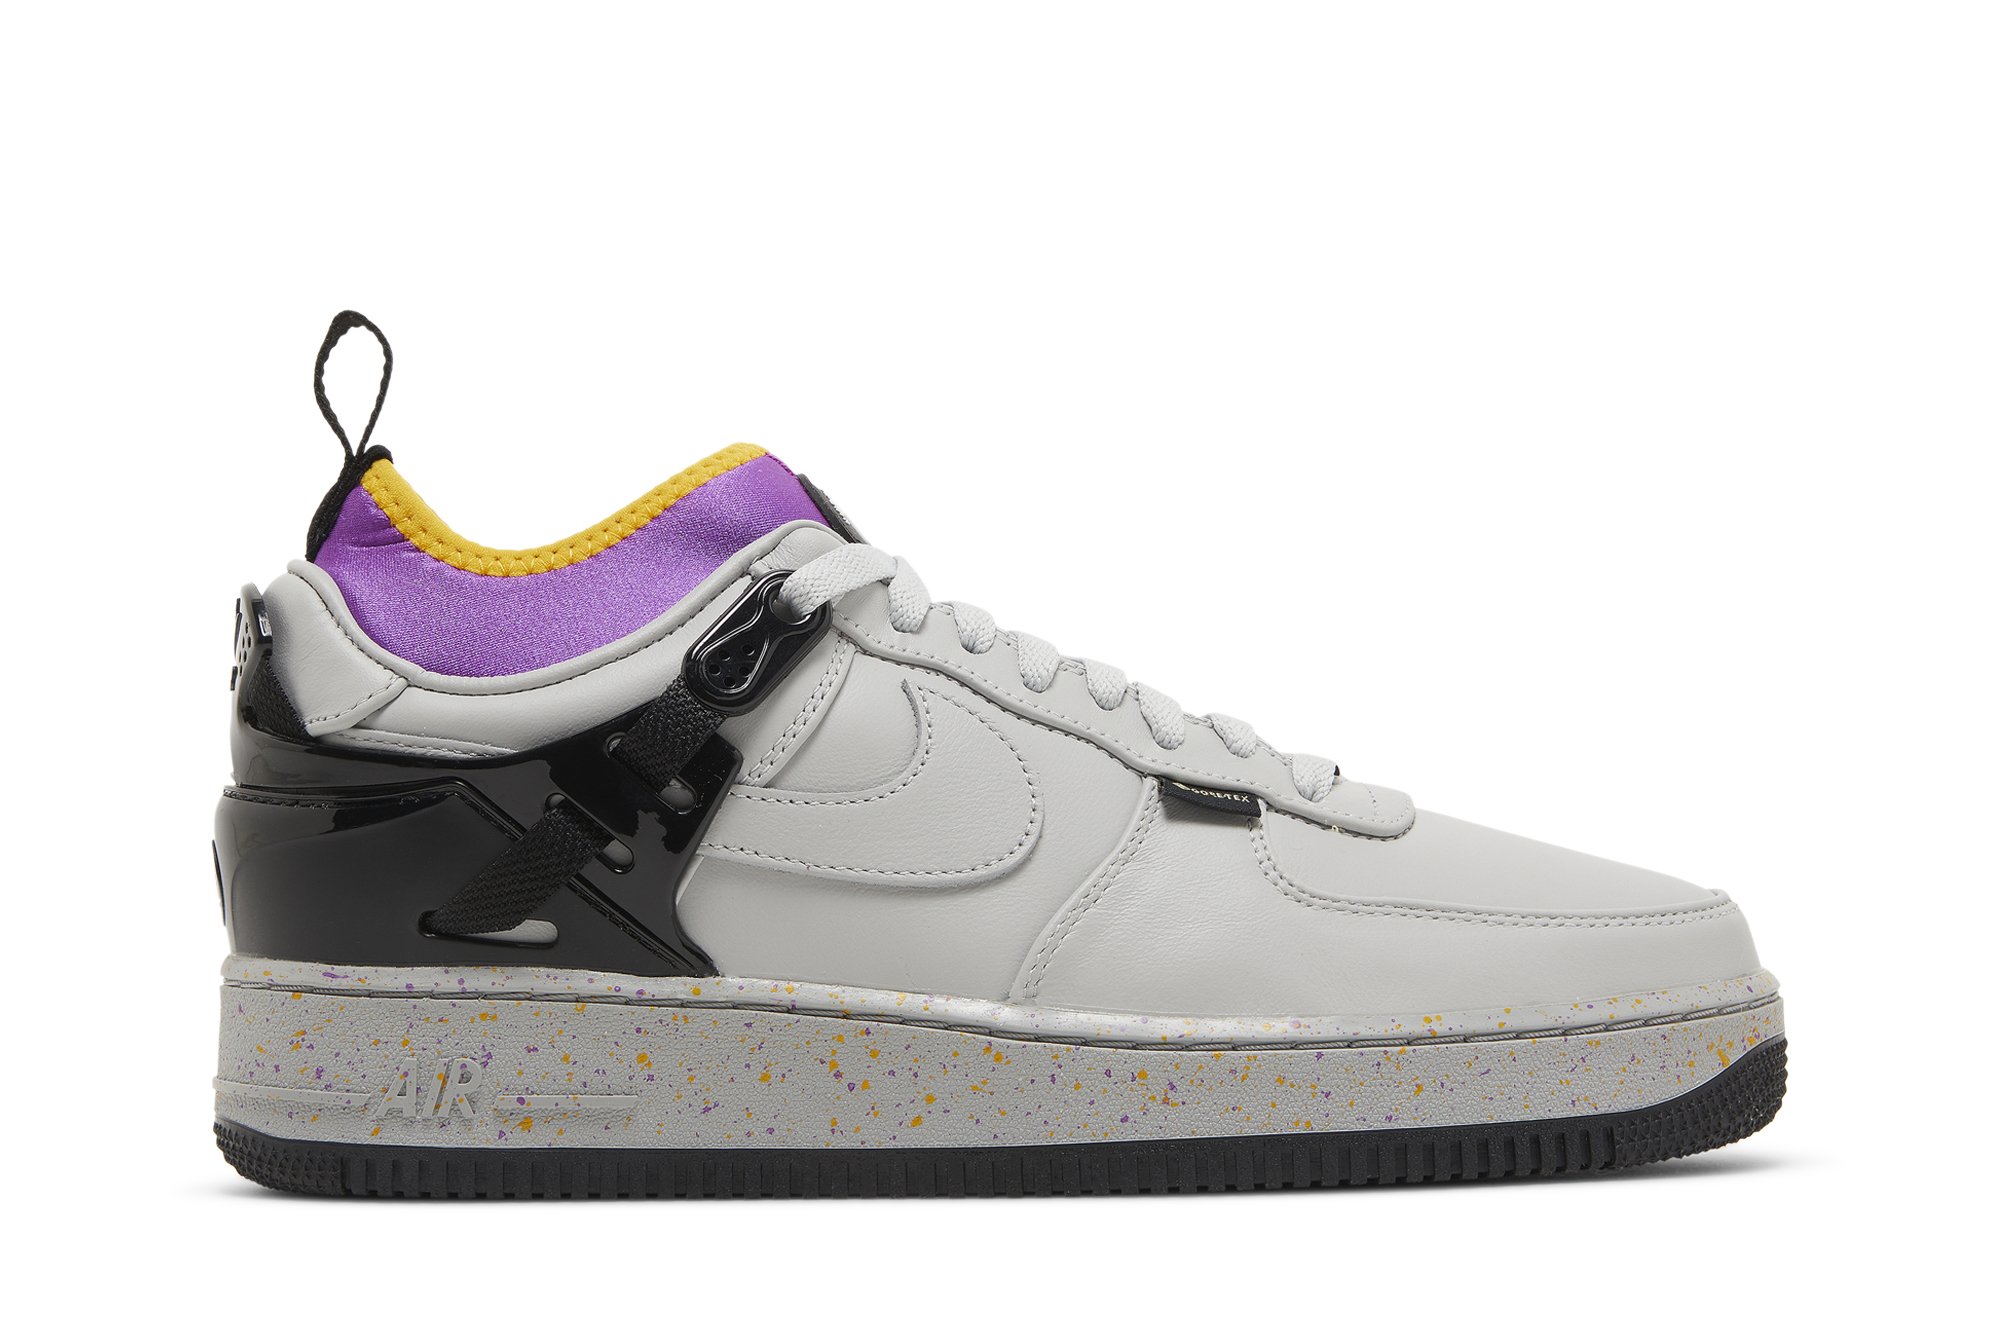 Undercover x Air Force 1 Low SP GORE-TEX 'Grey Fog'